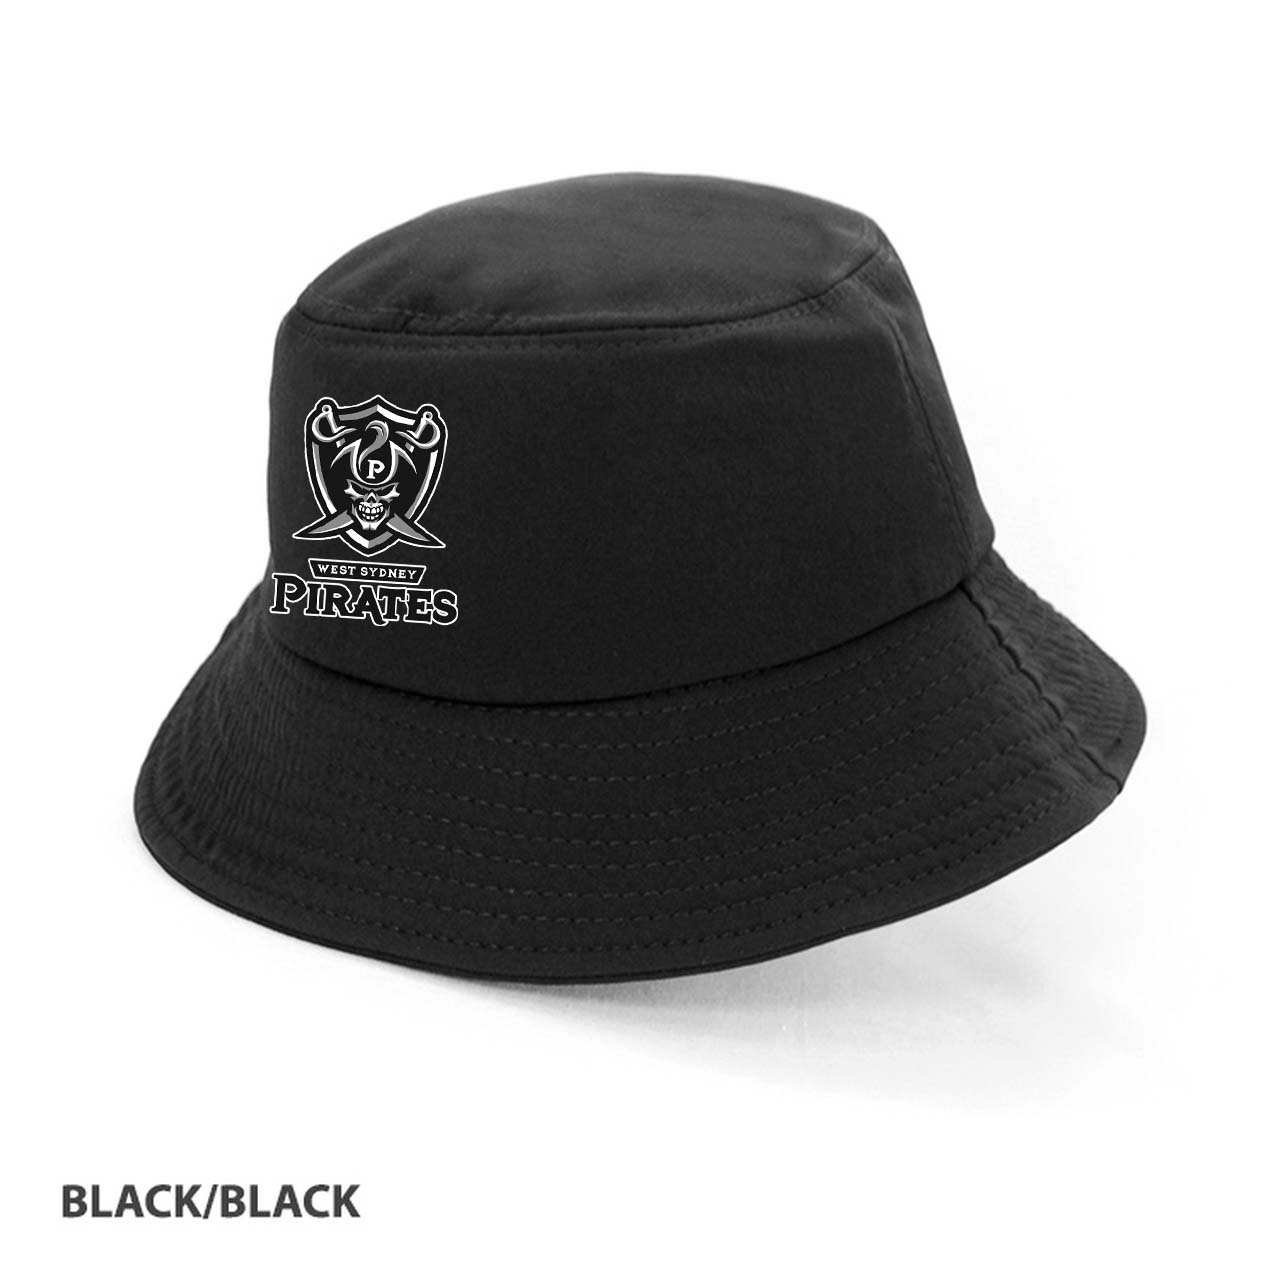 Pirates Kids Bucket hat Printed with toggle